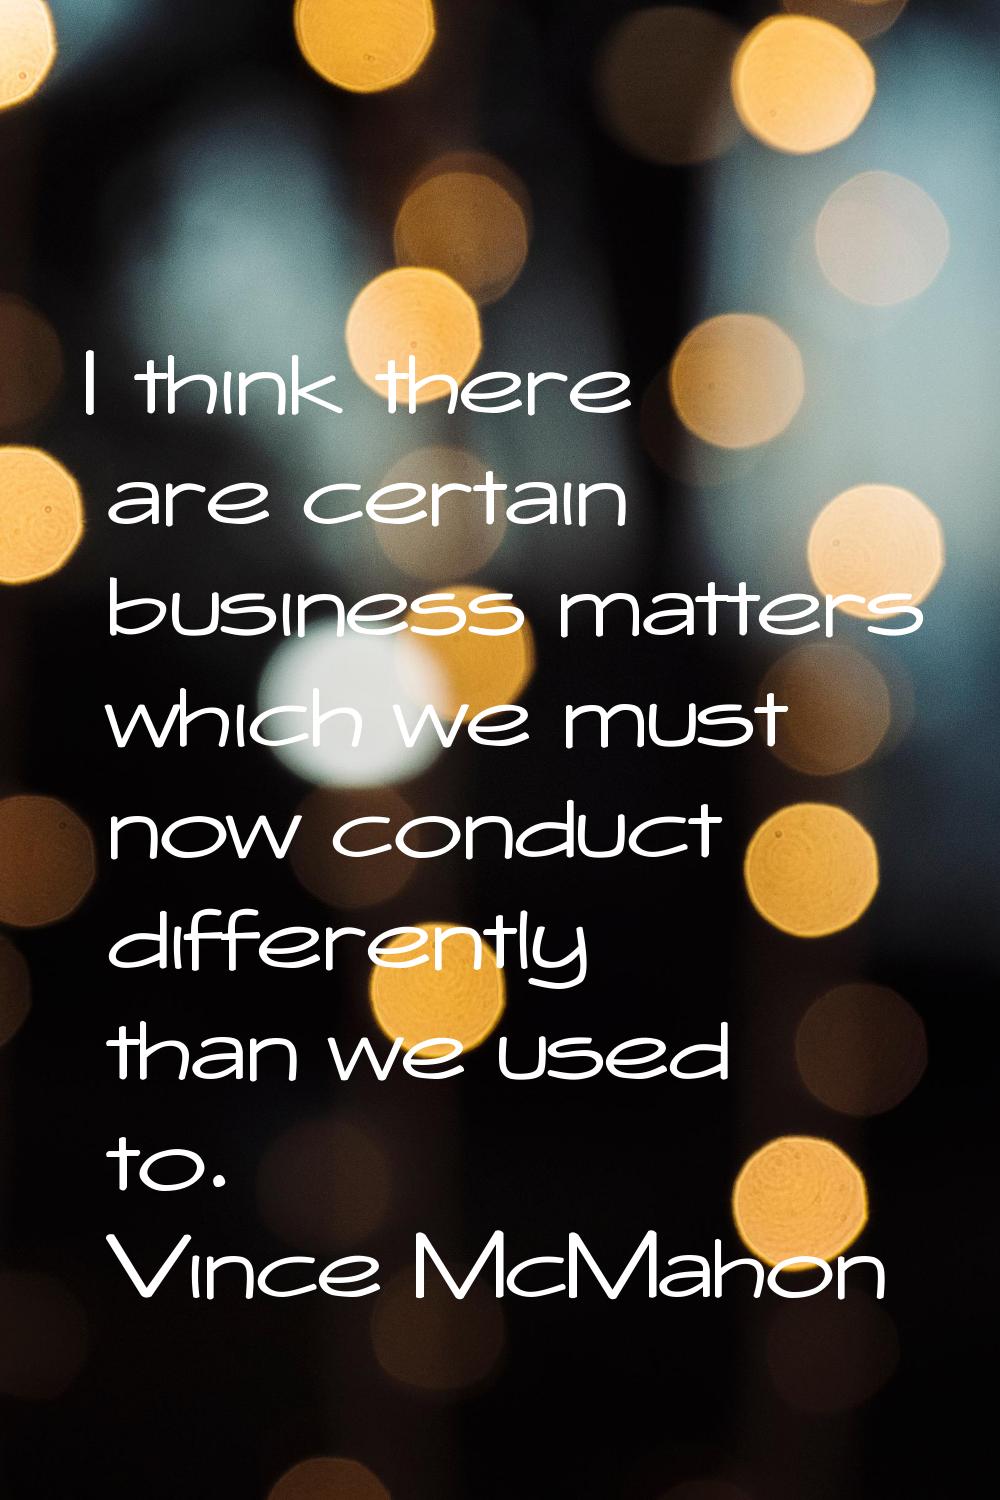 I think there are certain business matters which we must now conduct differently than we used to.